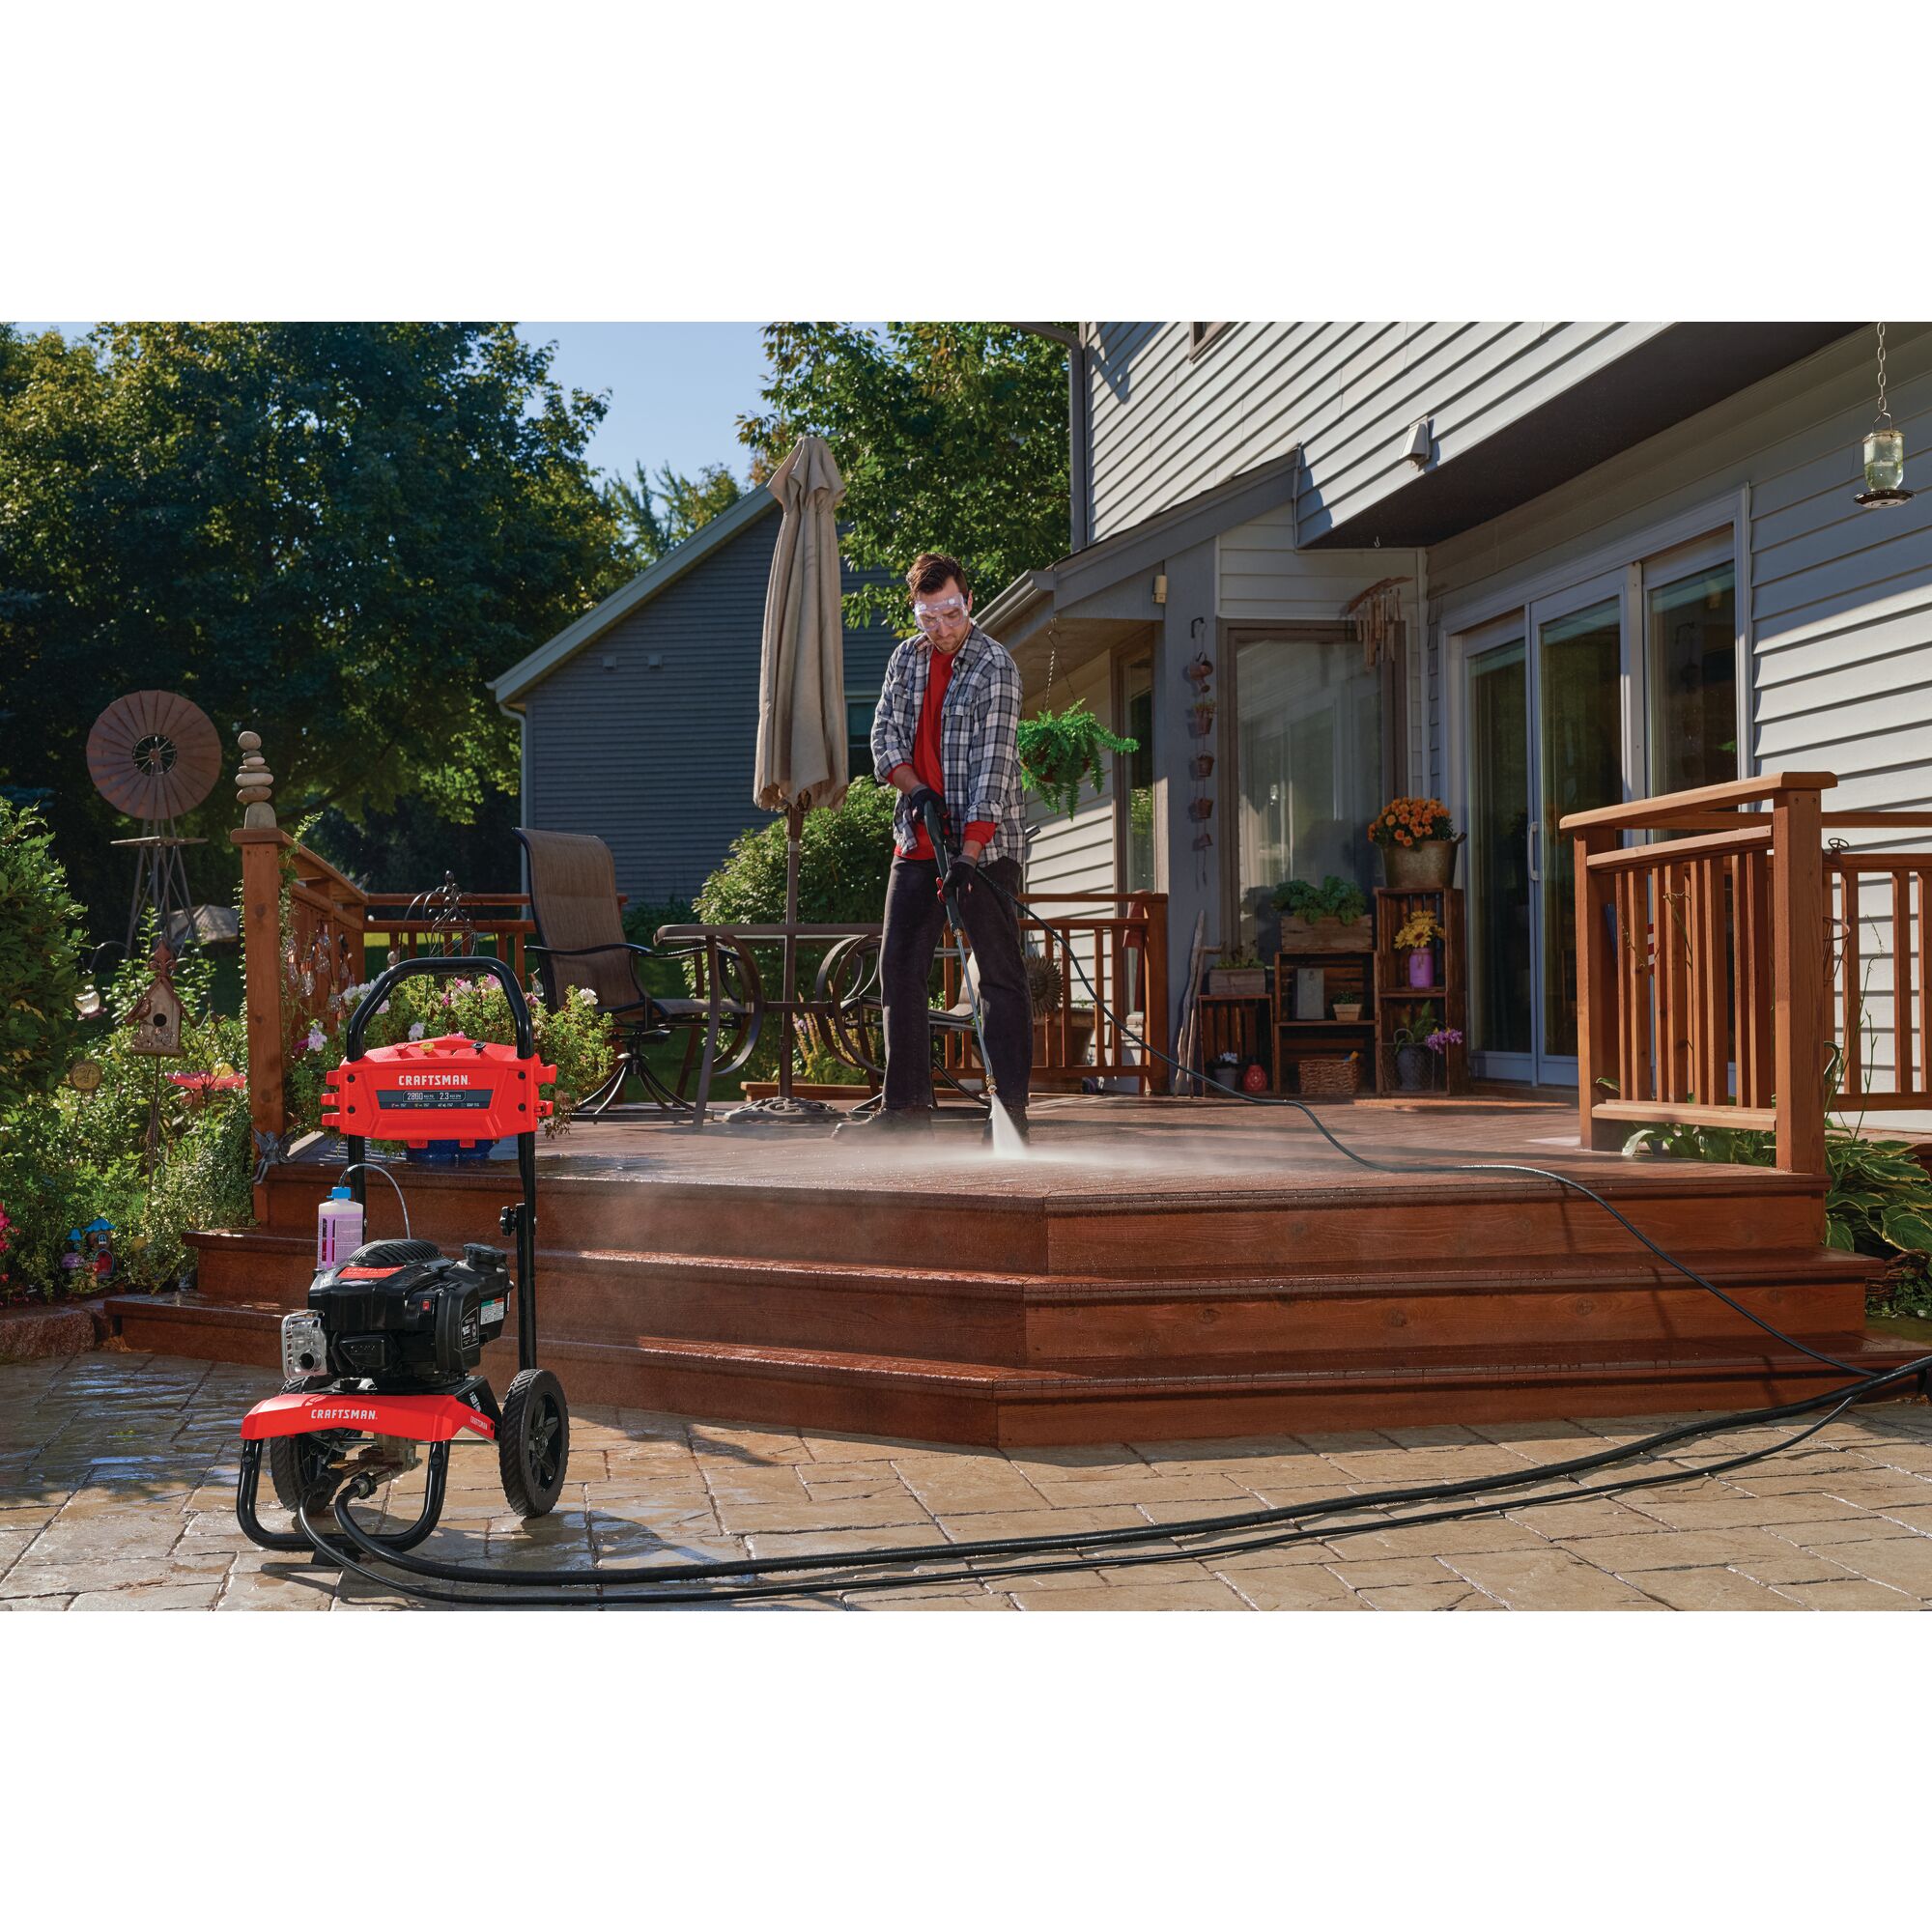 2800 MAX Pounds per Square Inch or 2 and three tenths MAX Gallons Per Minute Pressure Washer being used by person to wash wooden deck of house outdoors.